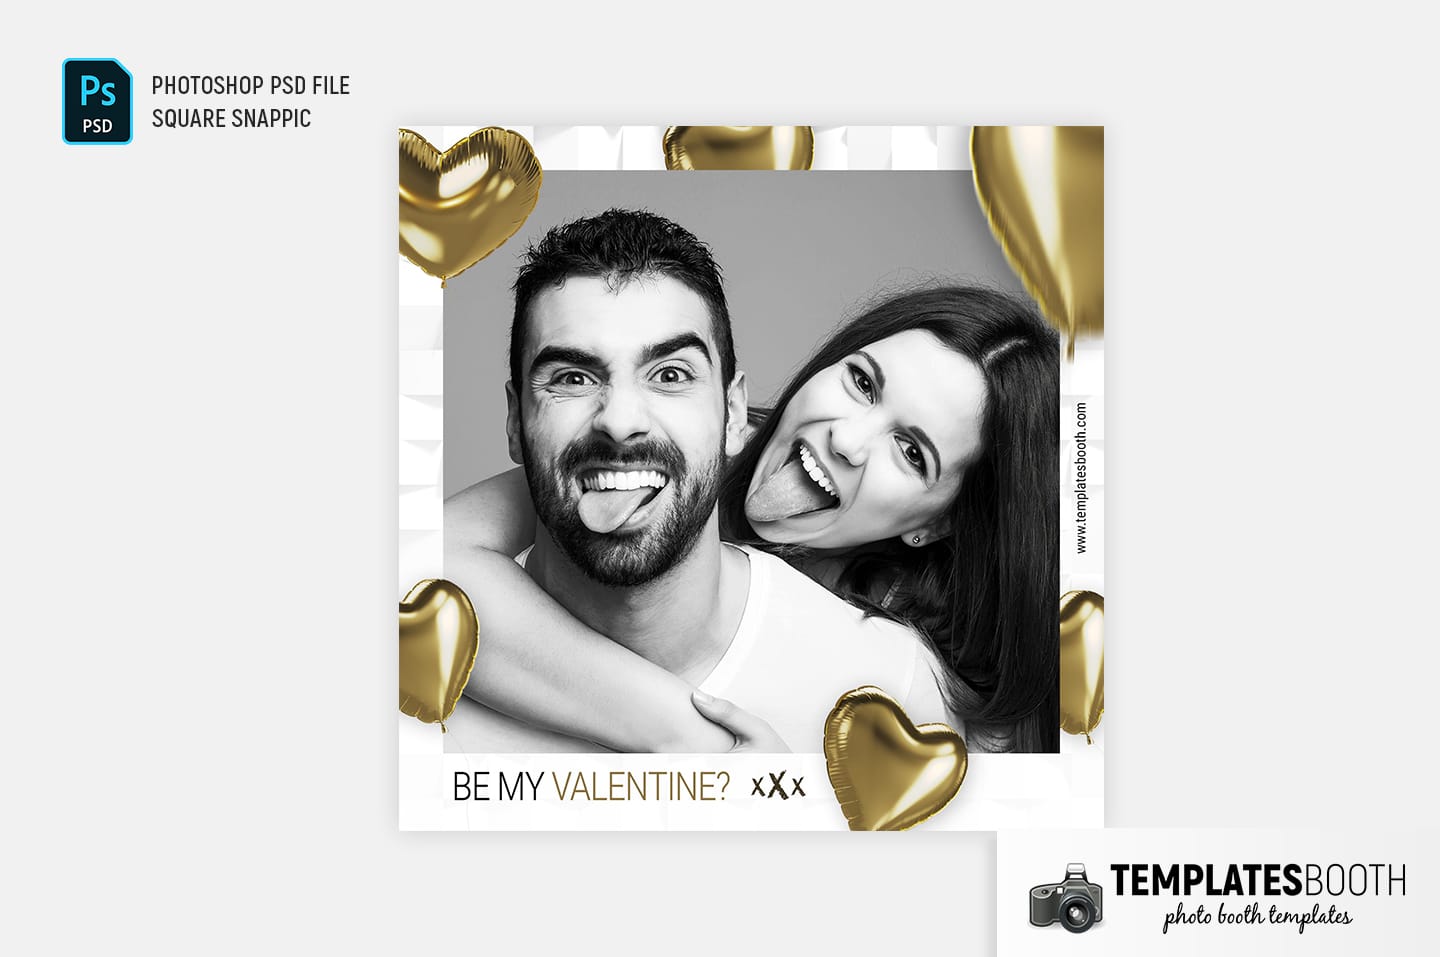 Be My Valentine Photo Booth Template (square Snappic)